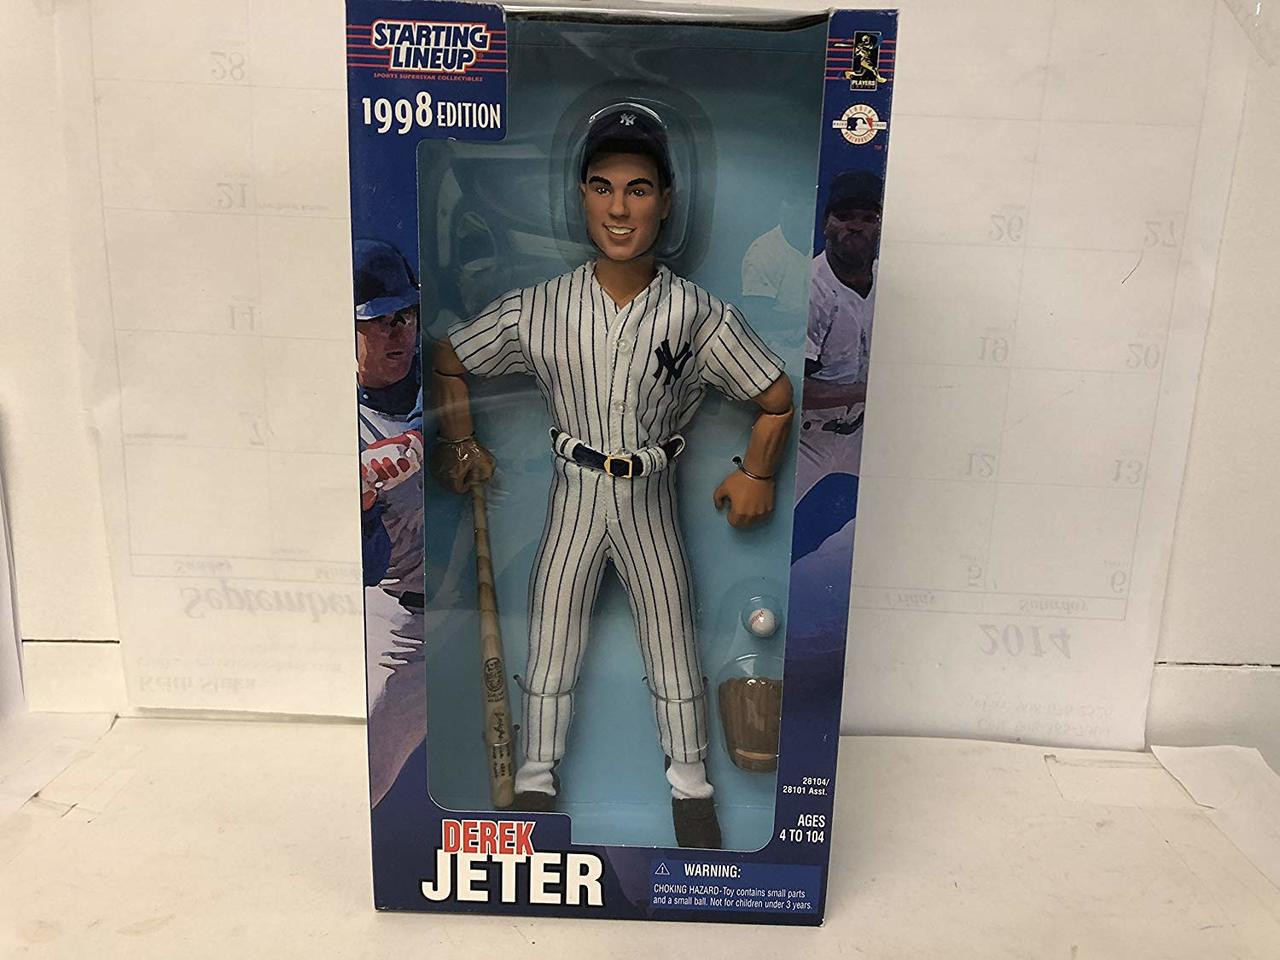 Starting Lineup 1998 Edition Derek Jeter & A-Rod Poseable Figures - Ruby  Lane